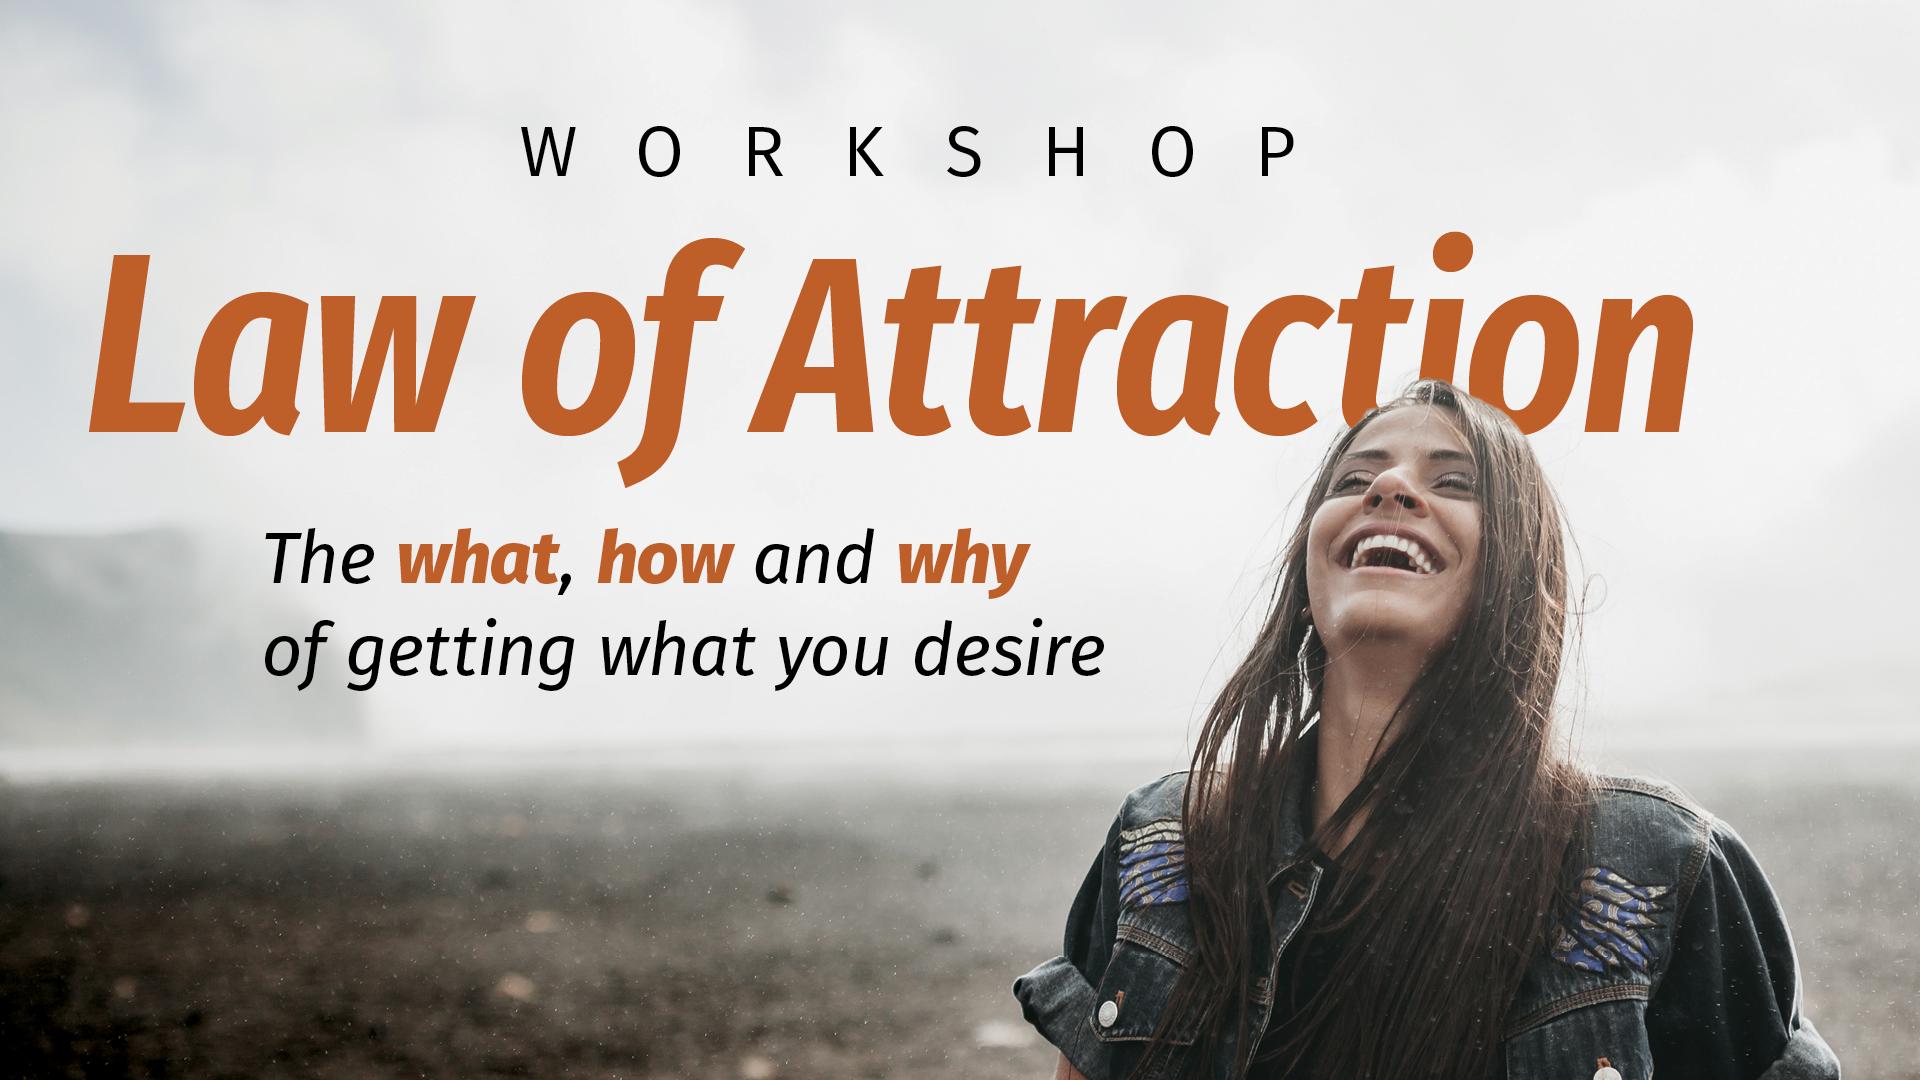 Law of Attraction - The WHAT, HOW, and WHY of getting what you desire 